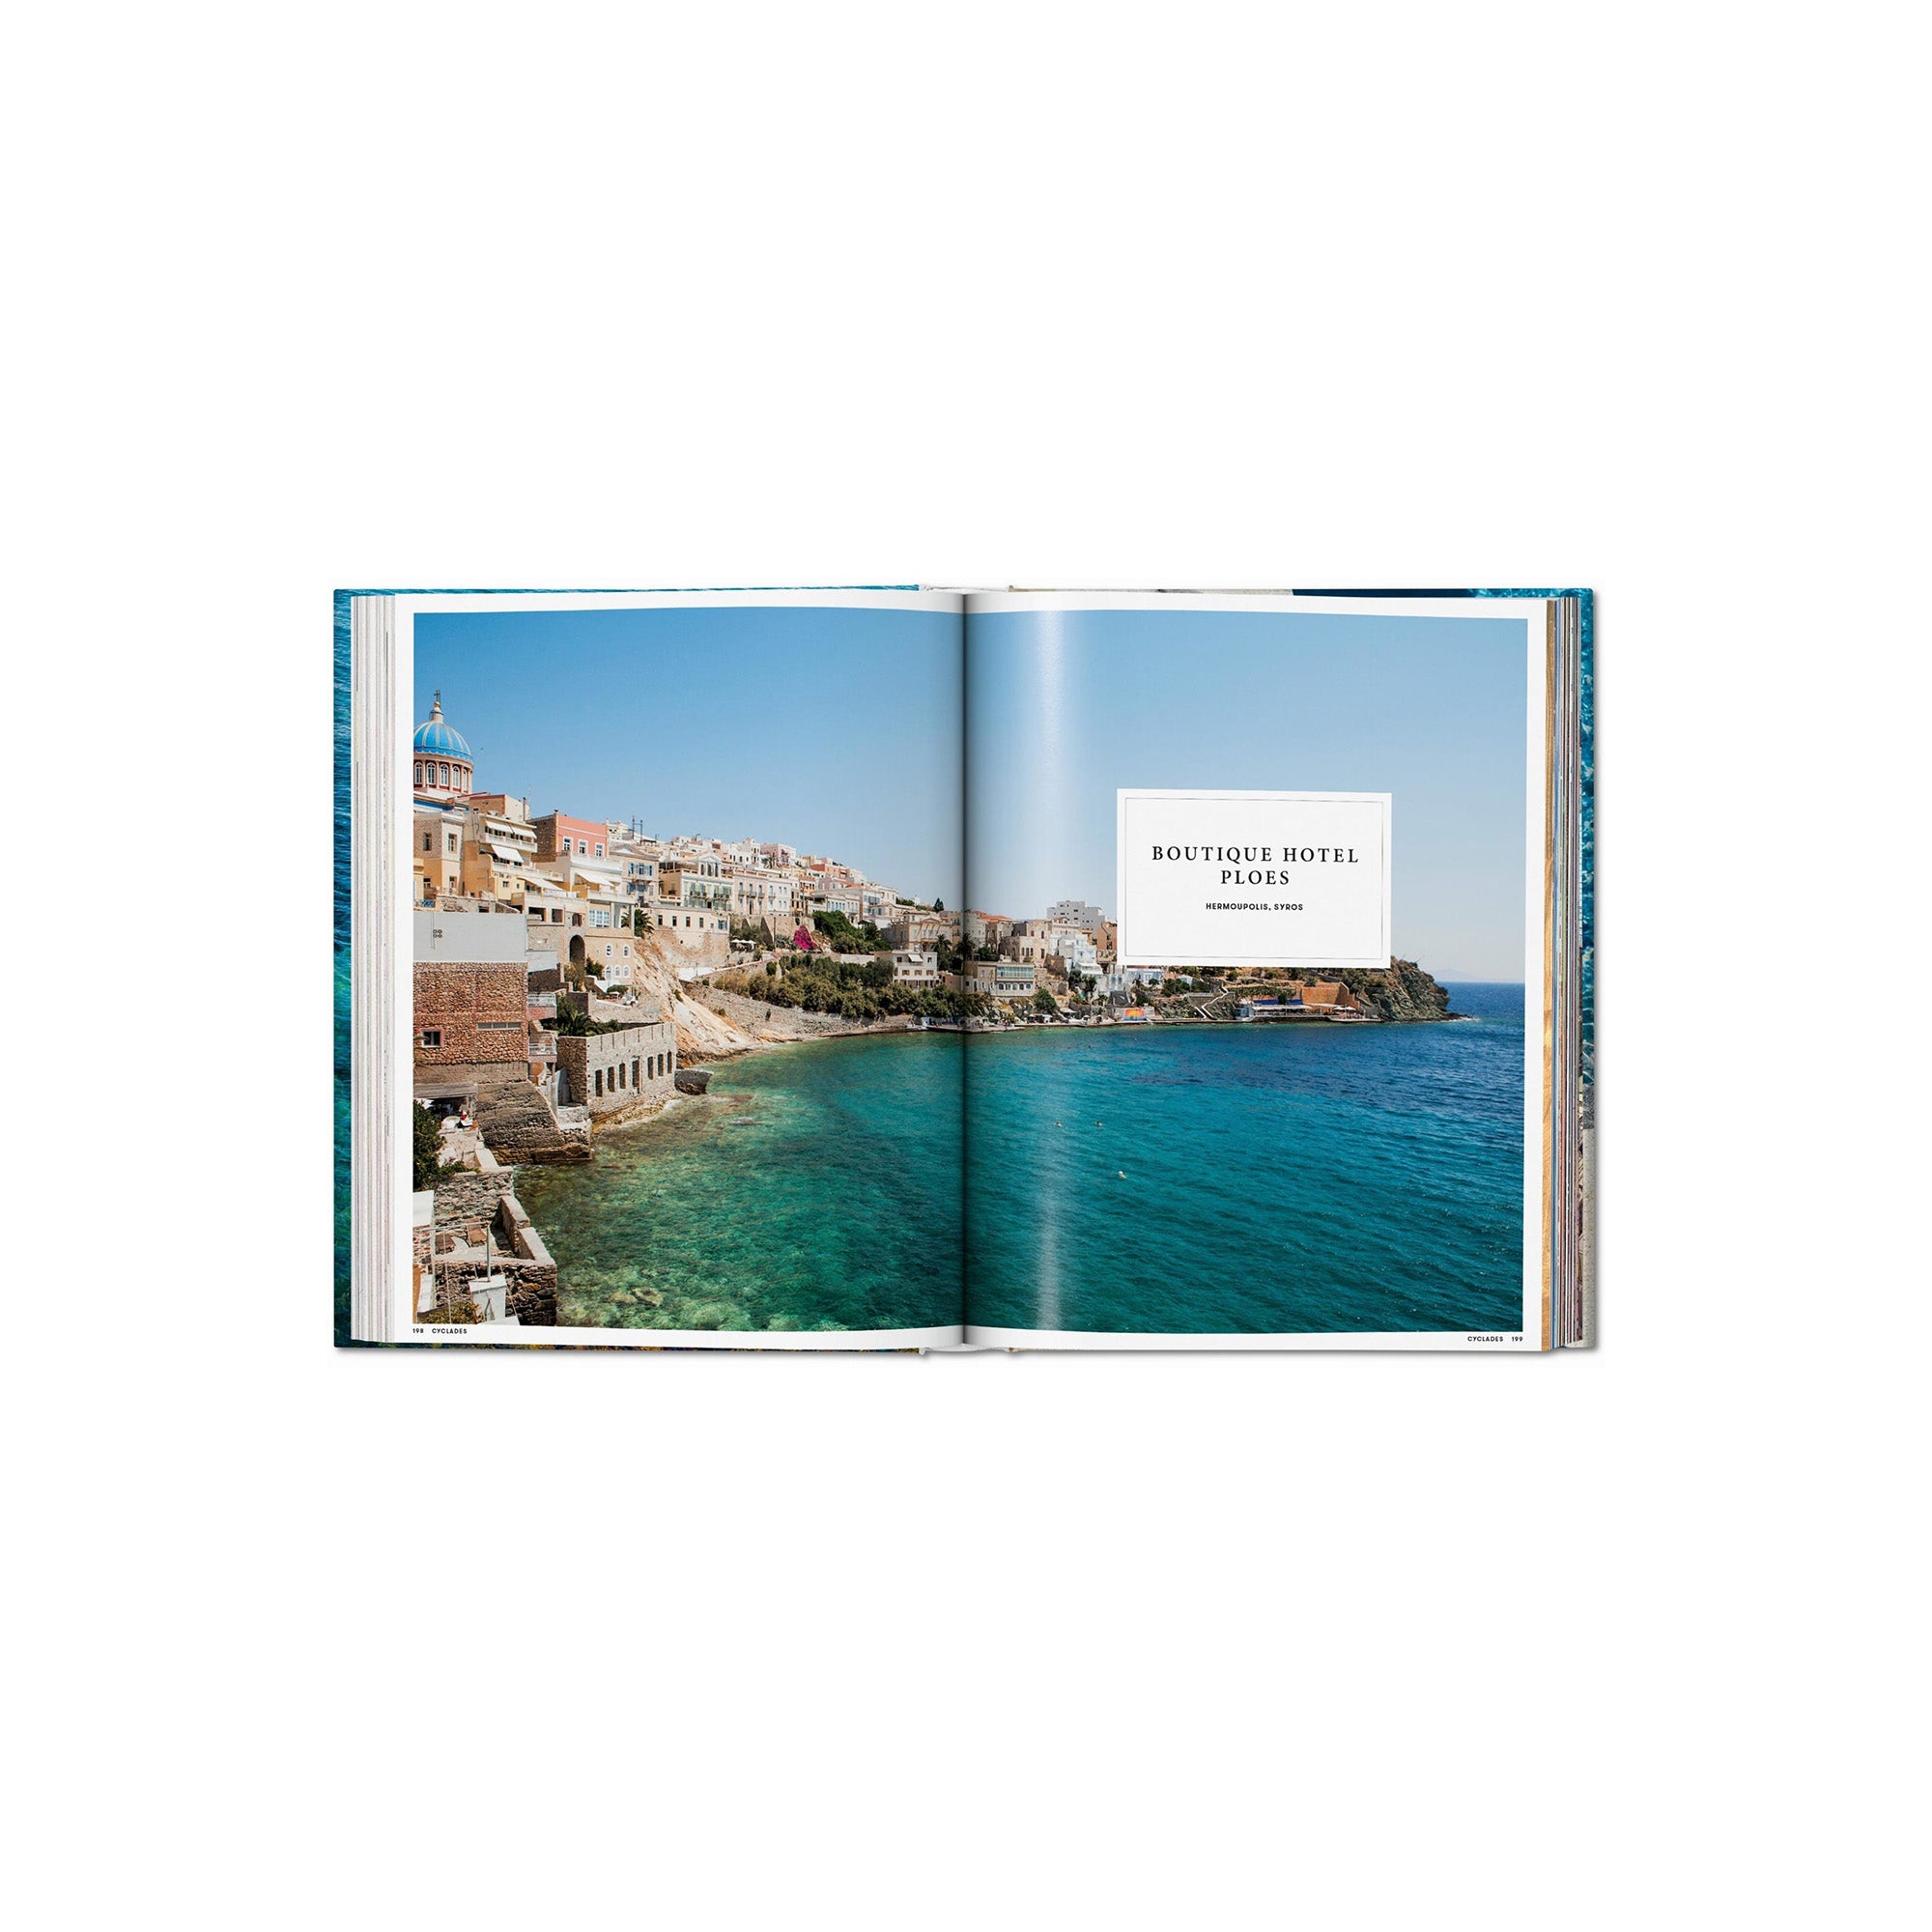 Great Escapes Greece. The Hotel Book - Hardcover